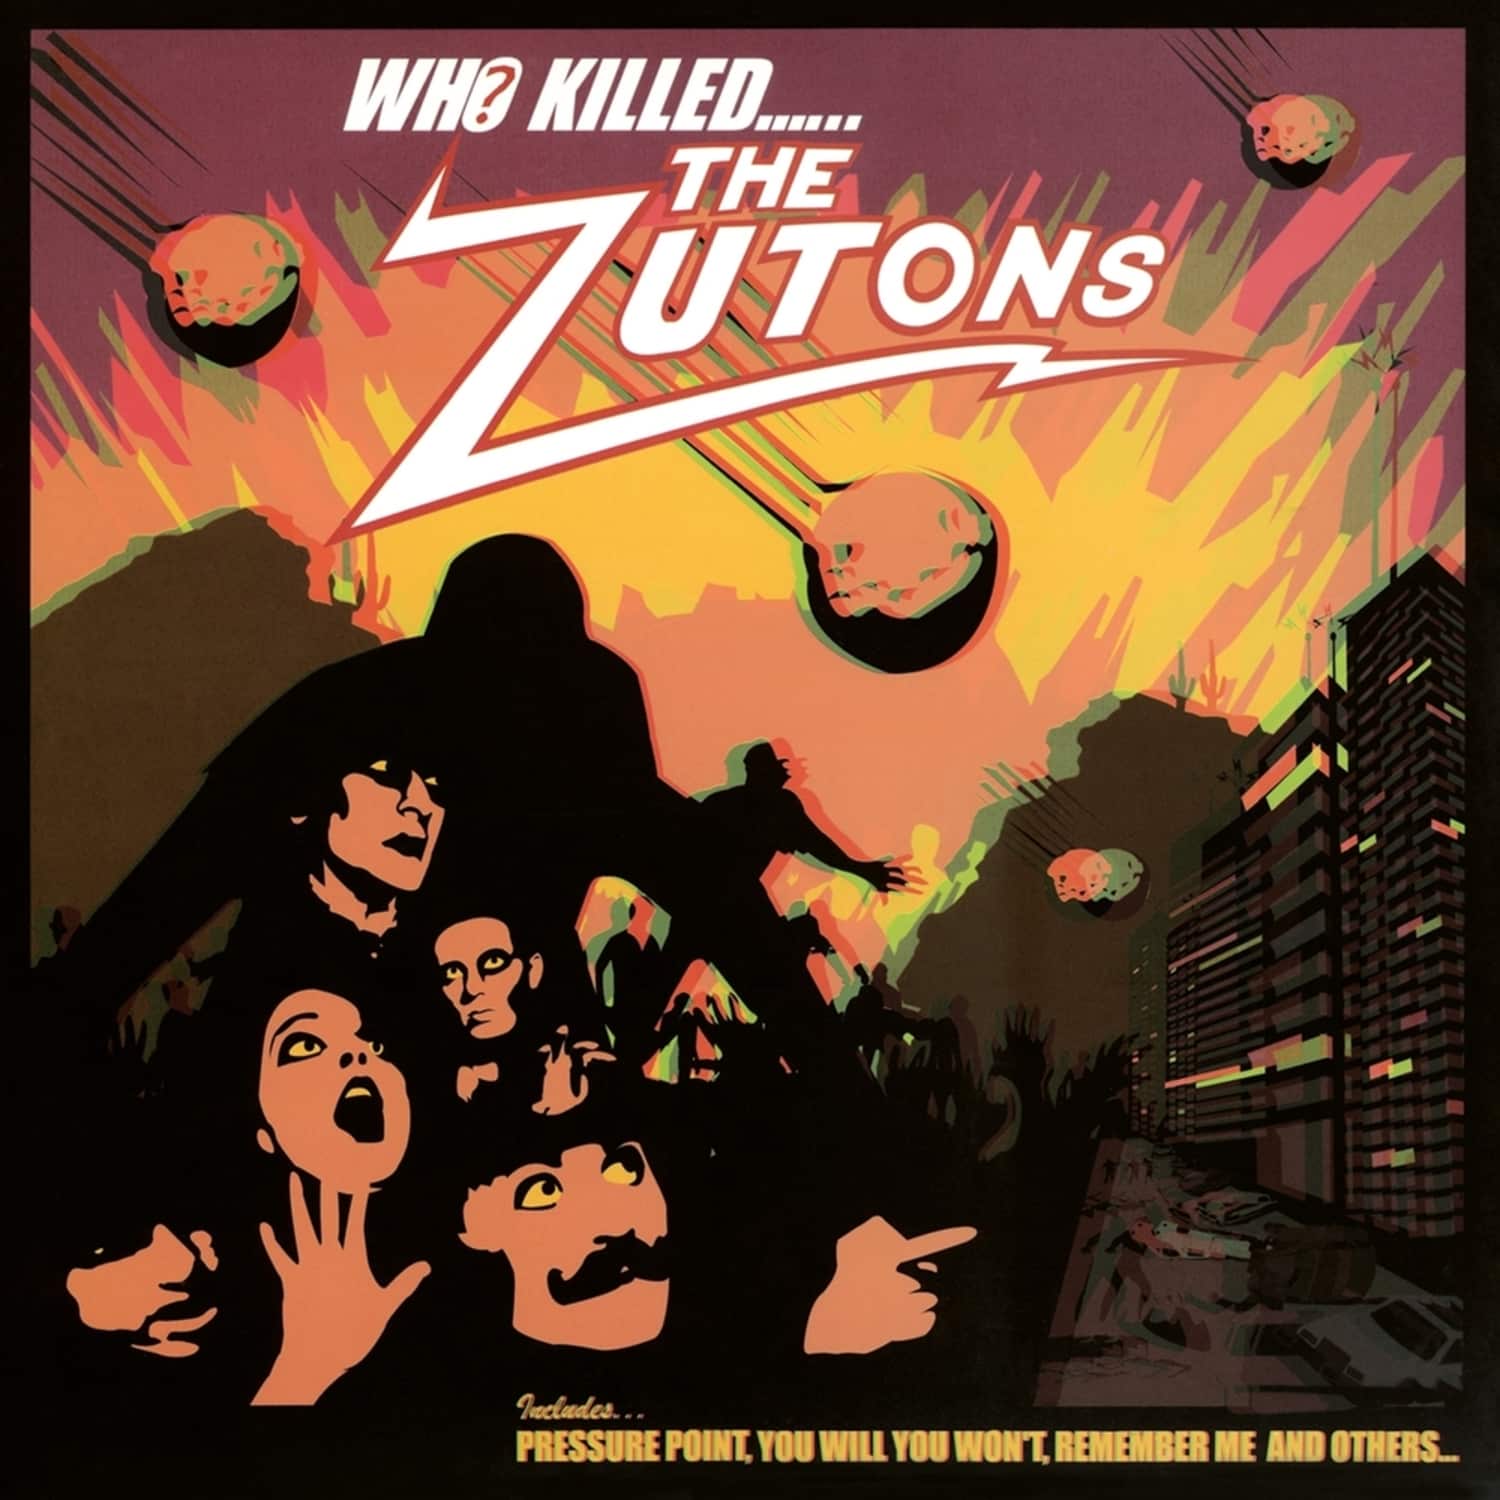 Zutons - WHO KILLED THE ZUTONS 